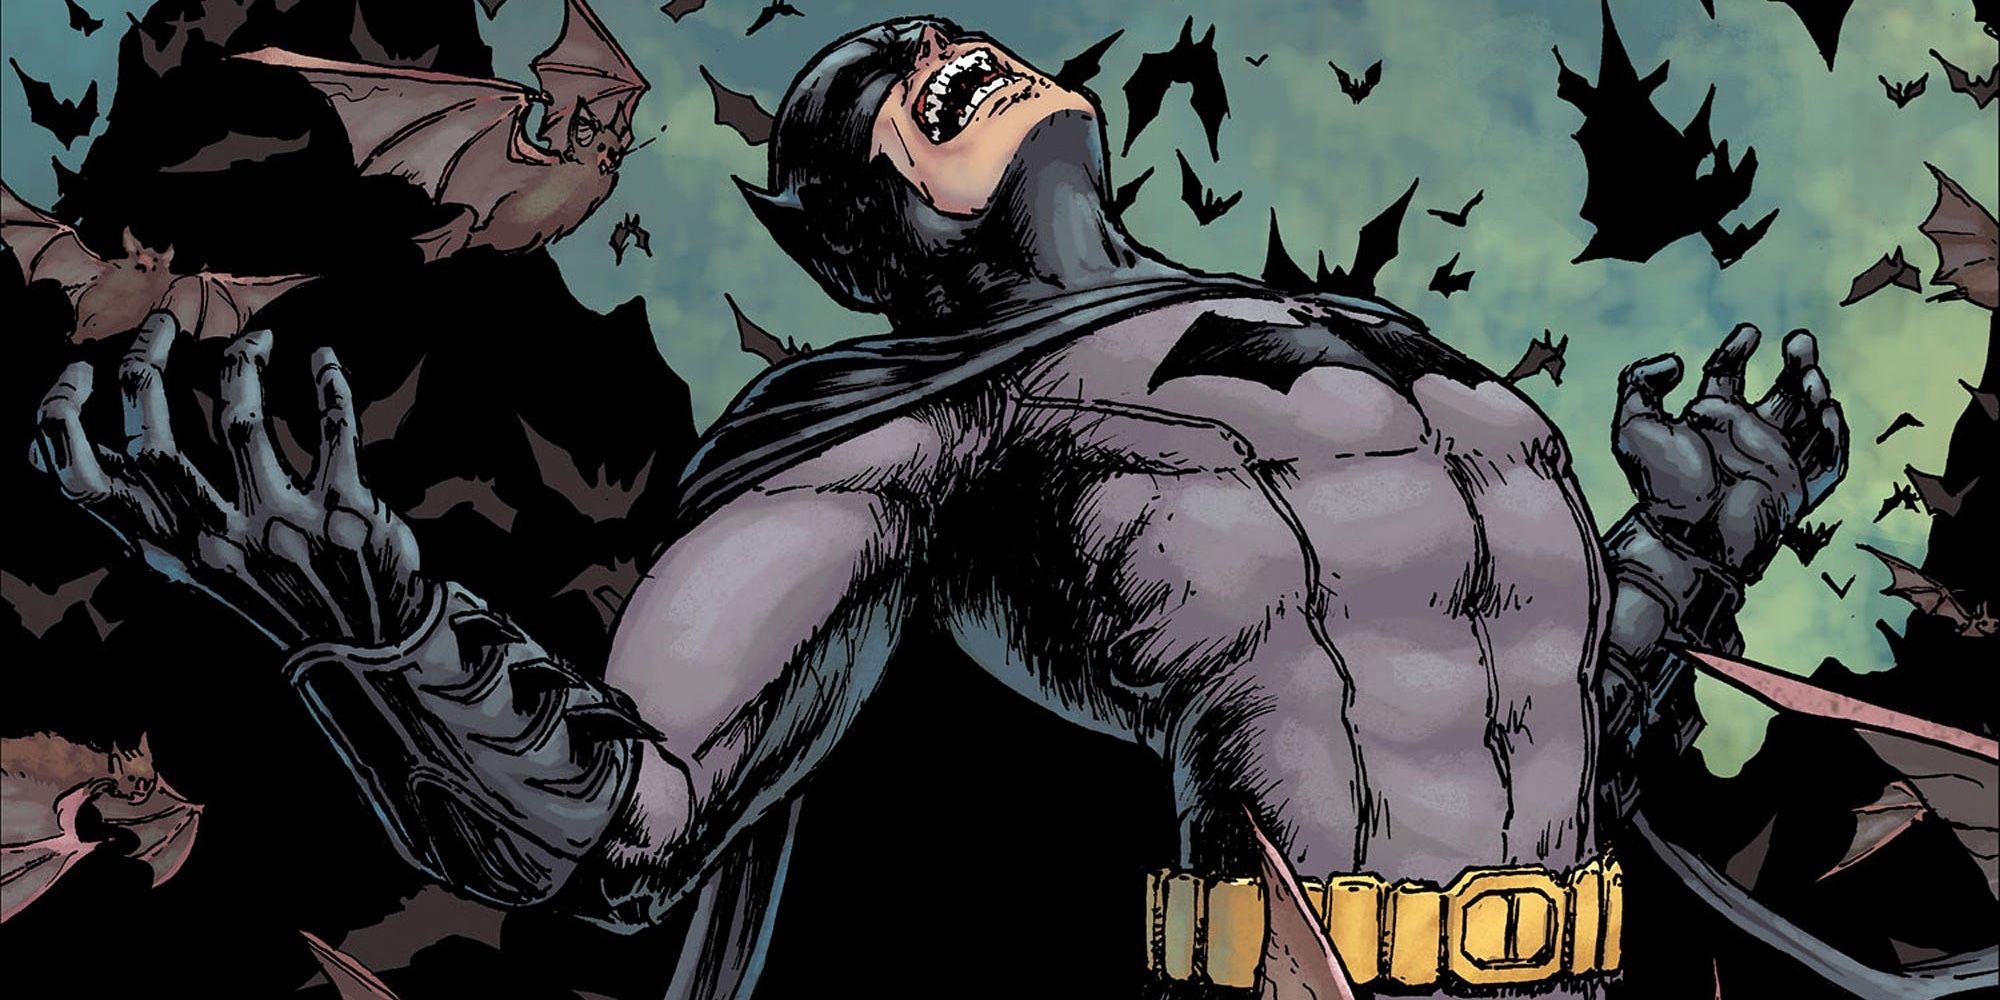 Batman in pain crying out